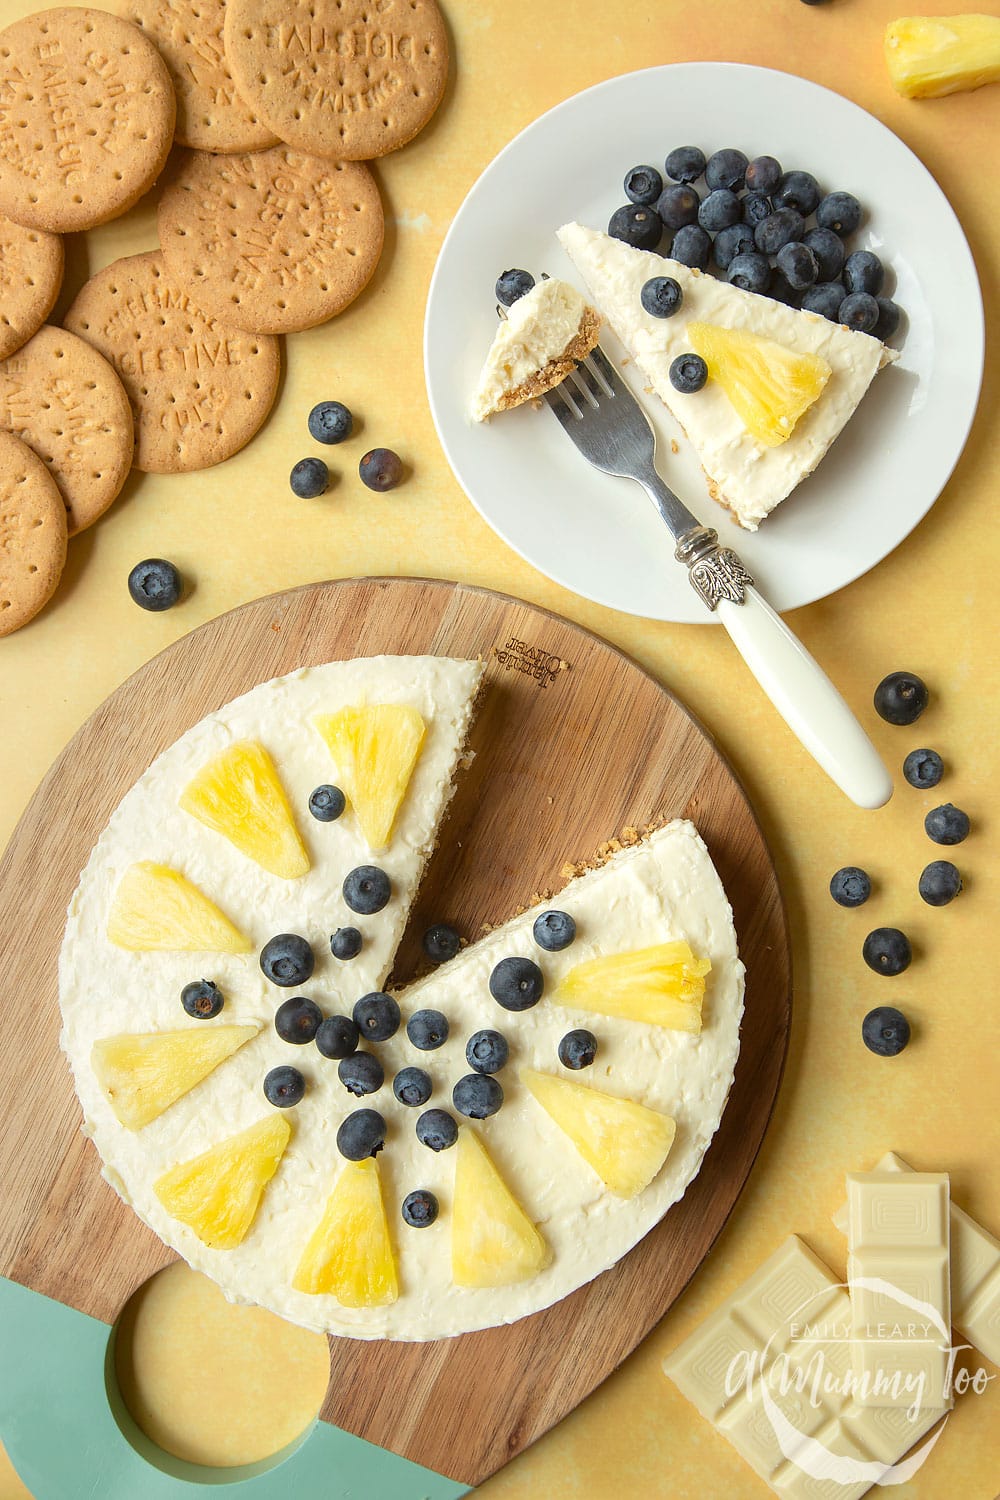 Extra special no-bake coconut cheesecake, decorated with fruit, served on a serving board. One slice is served to a small plate with blueberries and a fork.